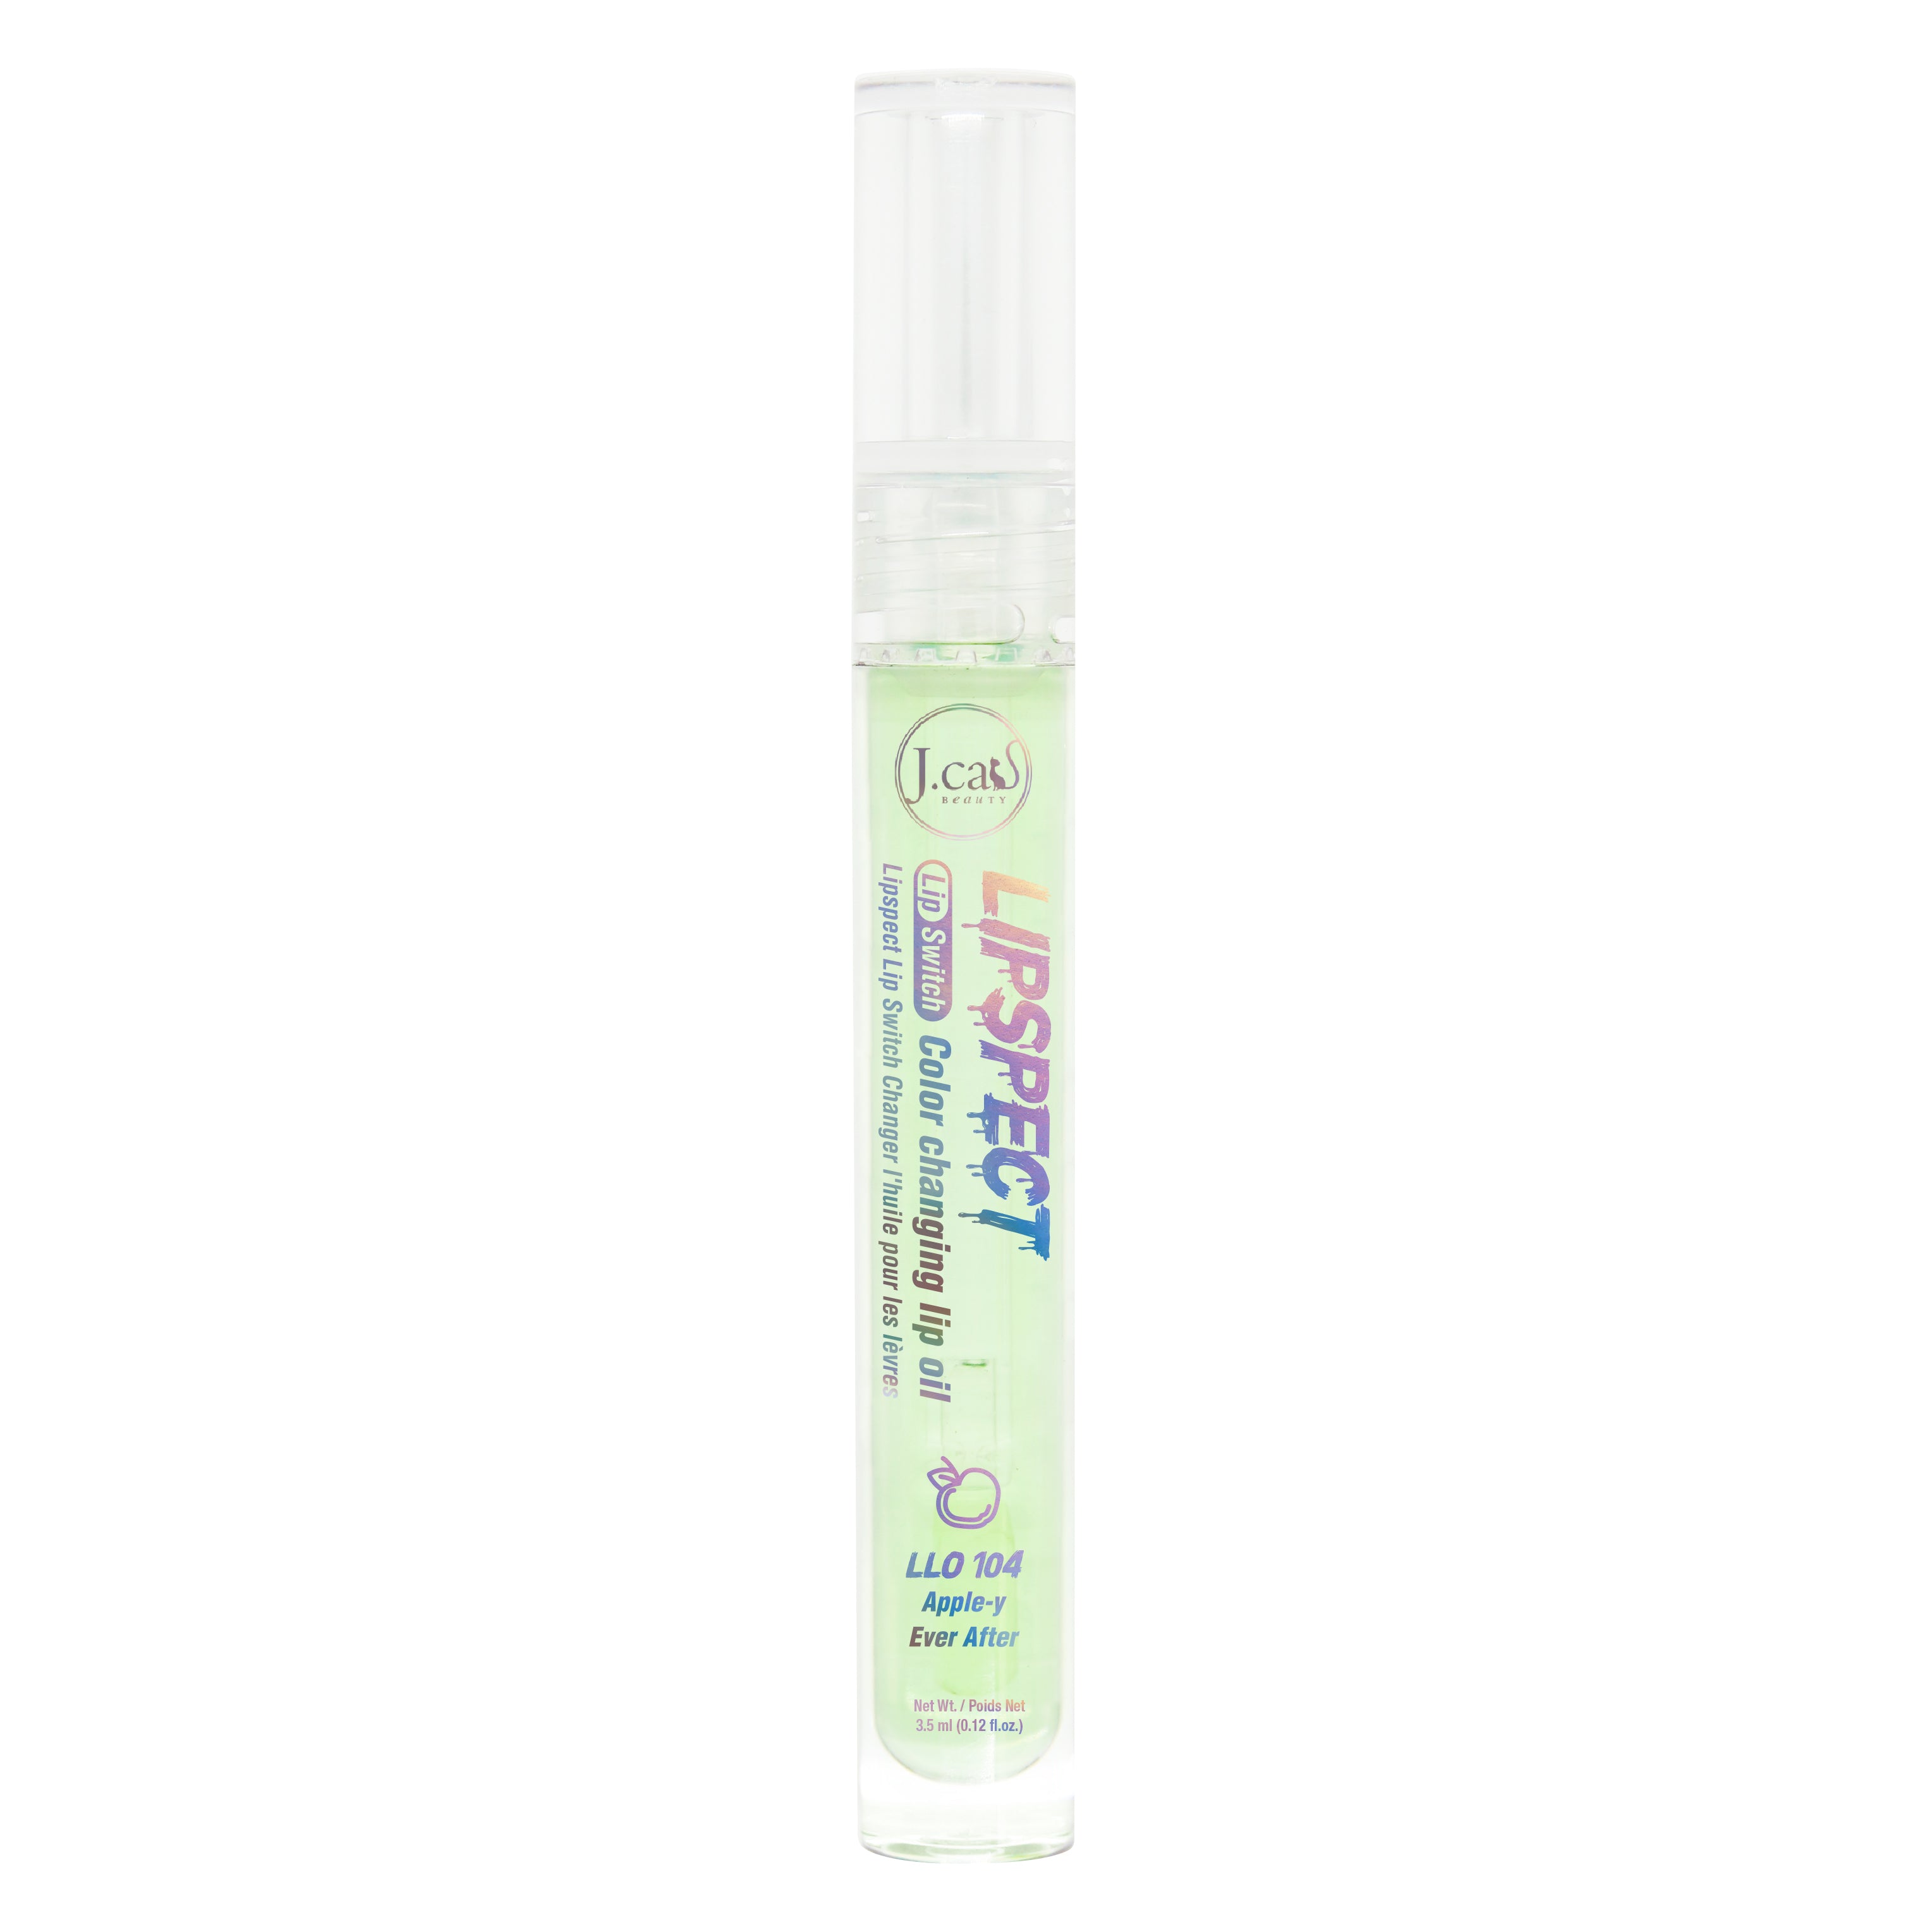 LIPSPECT LIP SWITCH COLOR CHANGING LIP OIL - LA7 ONLINE Apple-y Ever After